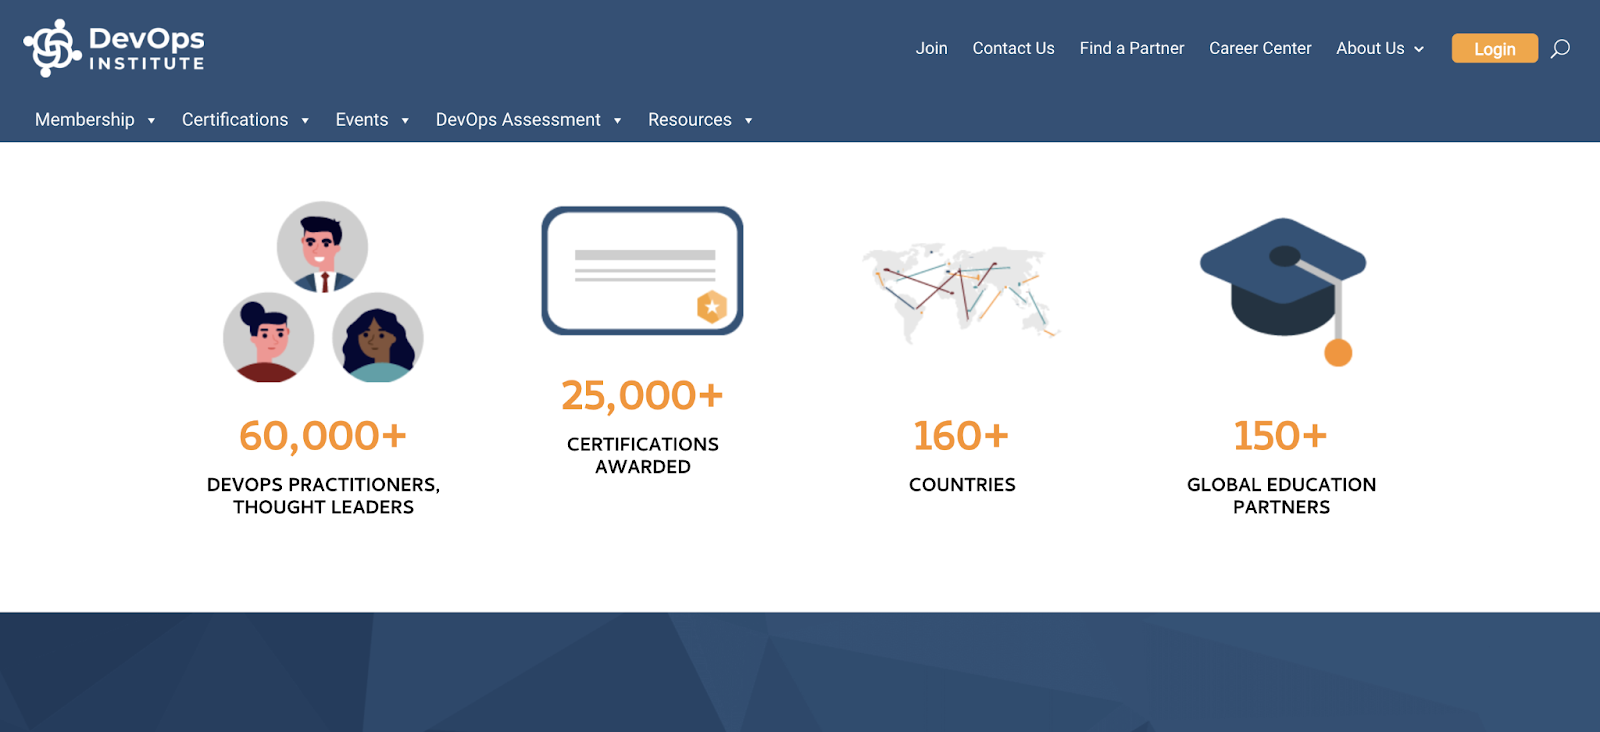 DevOps Institute homepage, displaying several icons that reflect their association's accomplishments and figures, including number of certifications, number of education partners, and so forth.